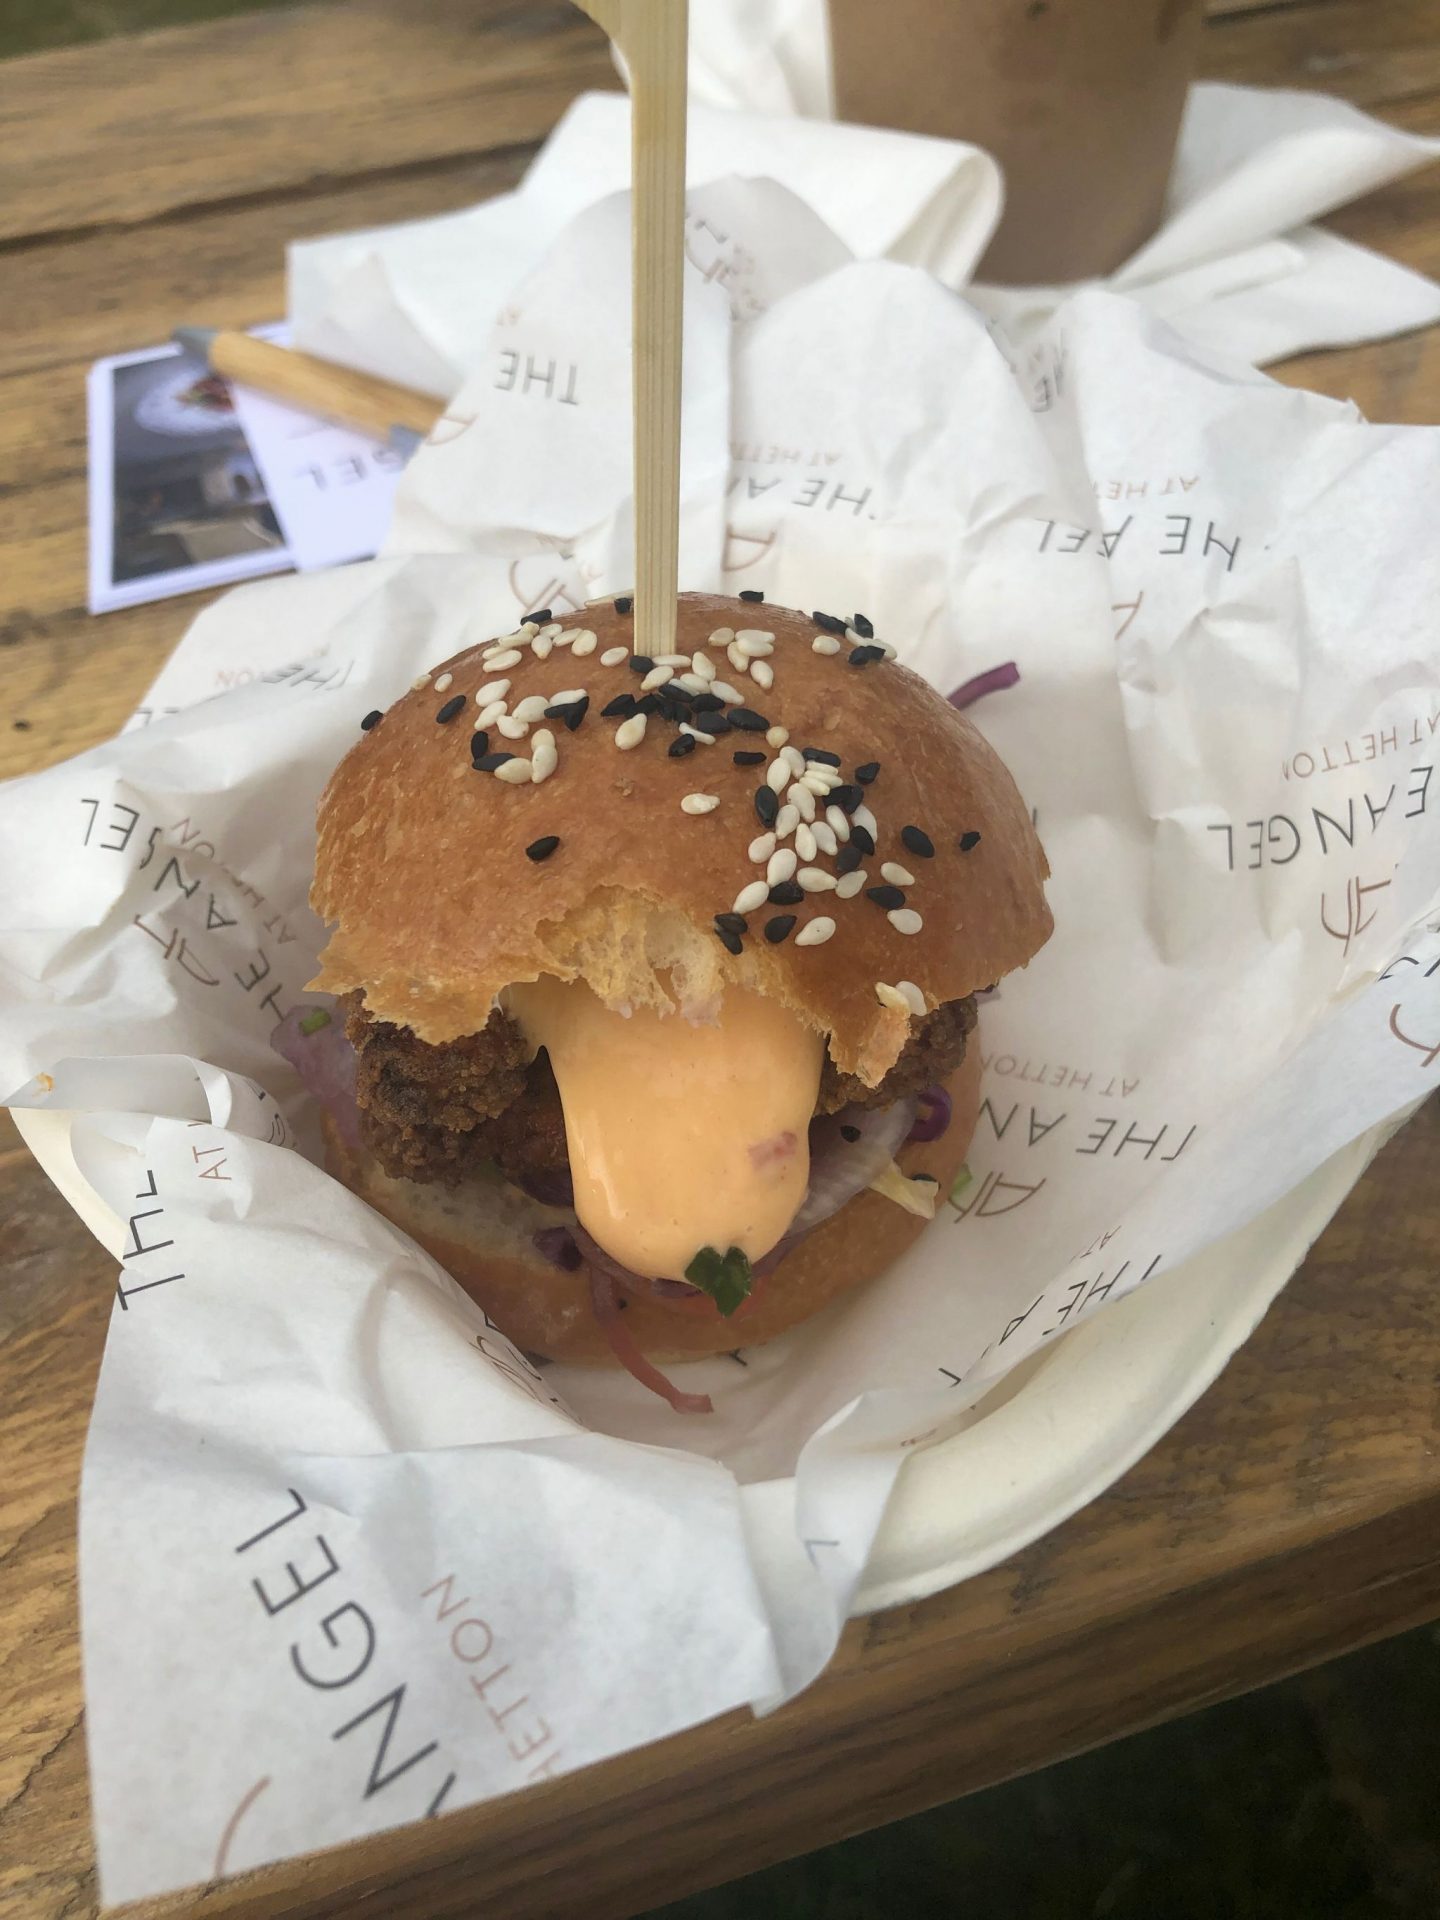 Crispy buttermilk chicken burger from the Angel at Hetton, eaten at Pub in the Park 2019 in Roundhay